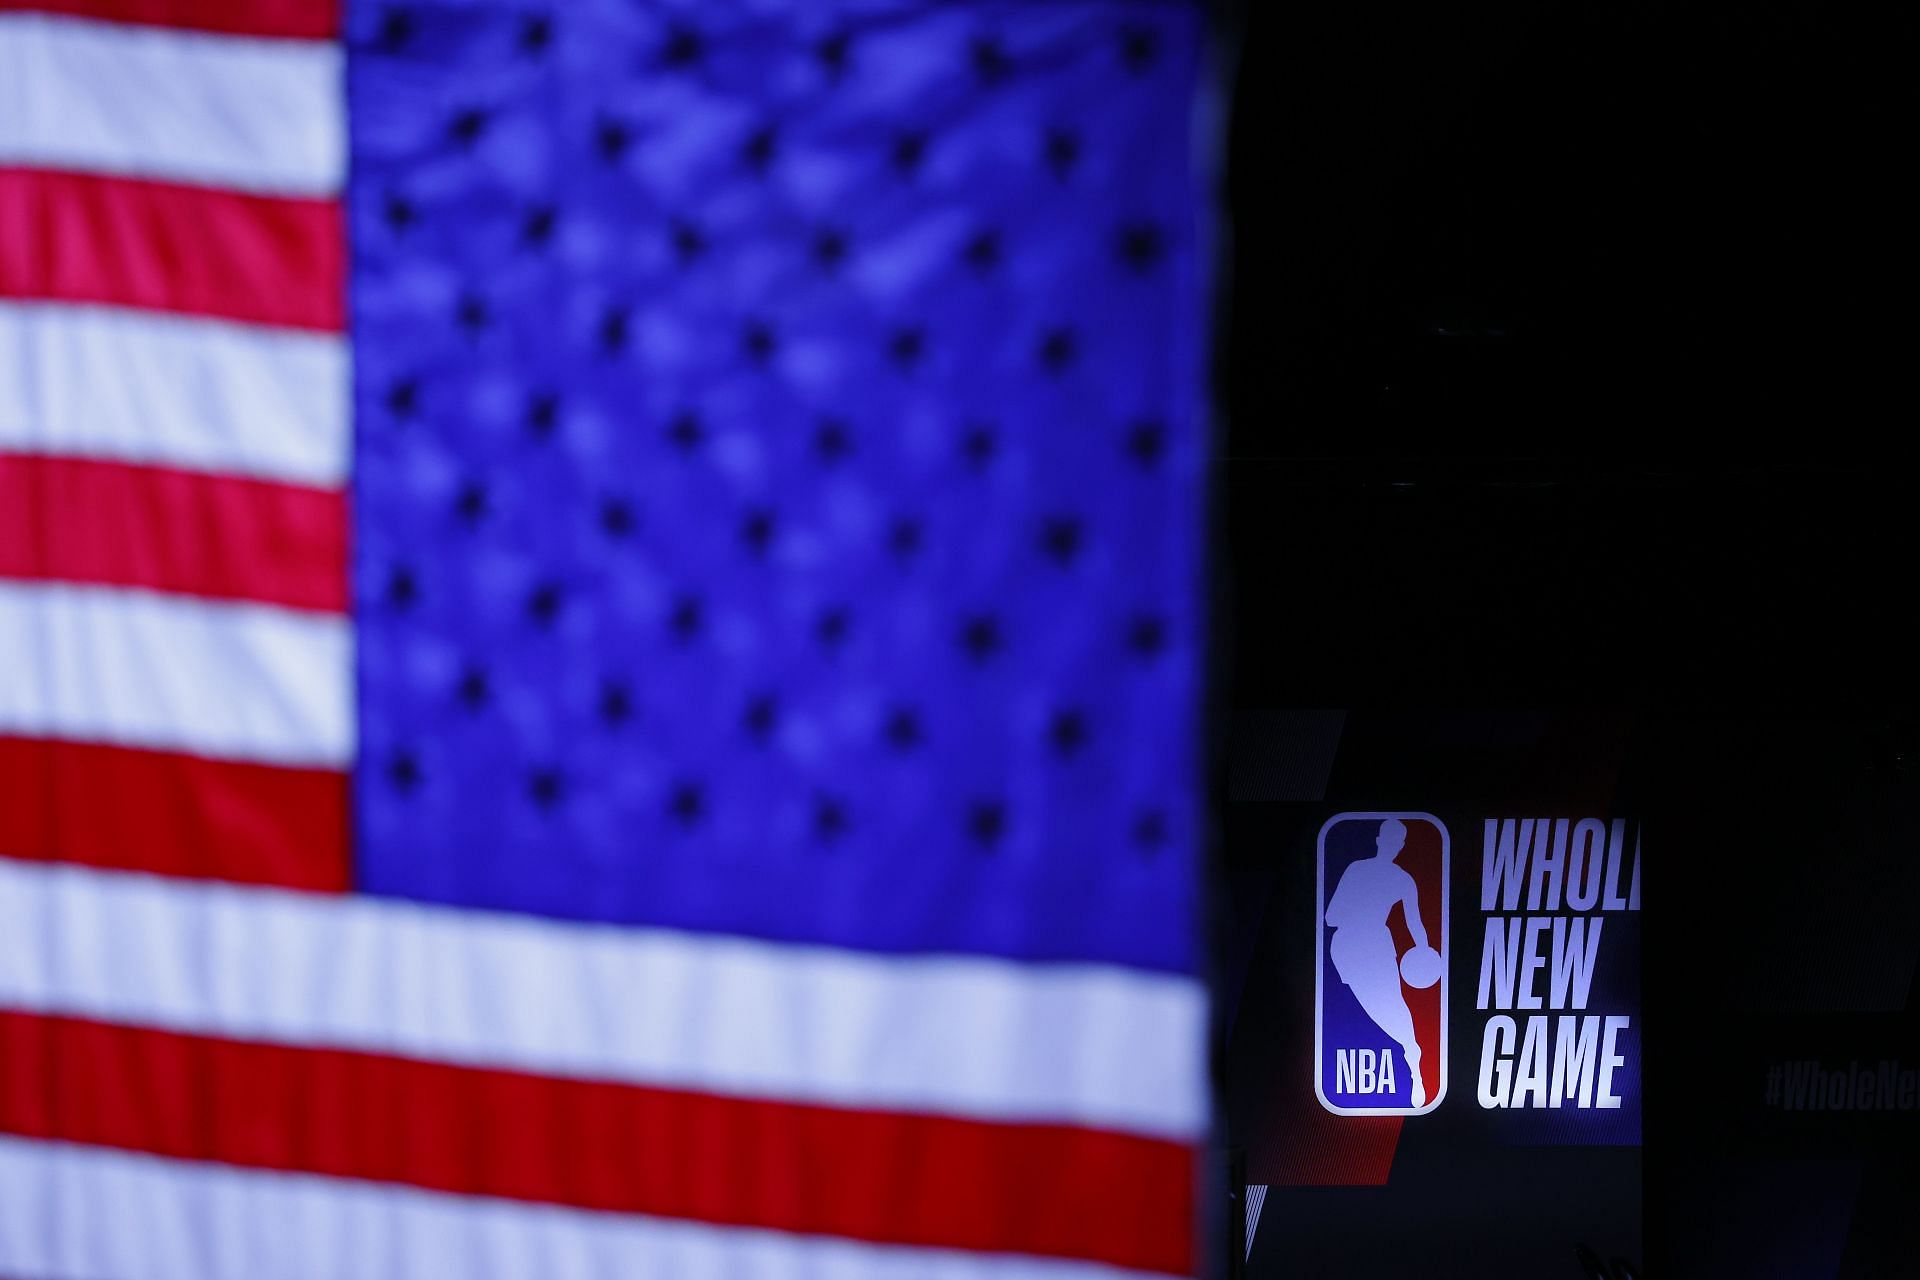 The NBA Whole New Game logo is seen before the start of a game.